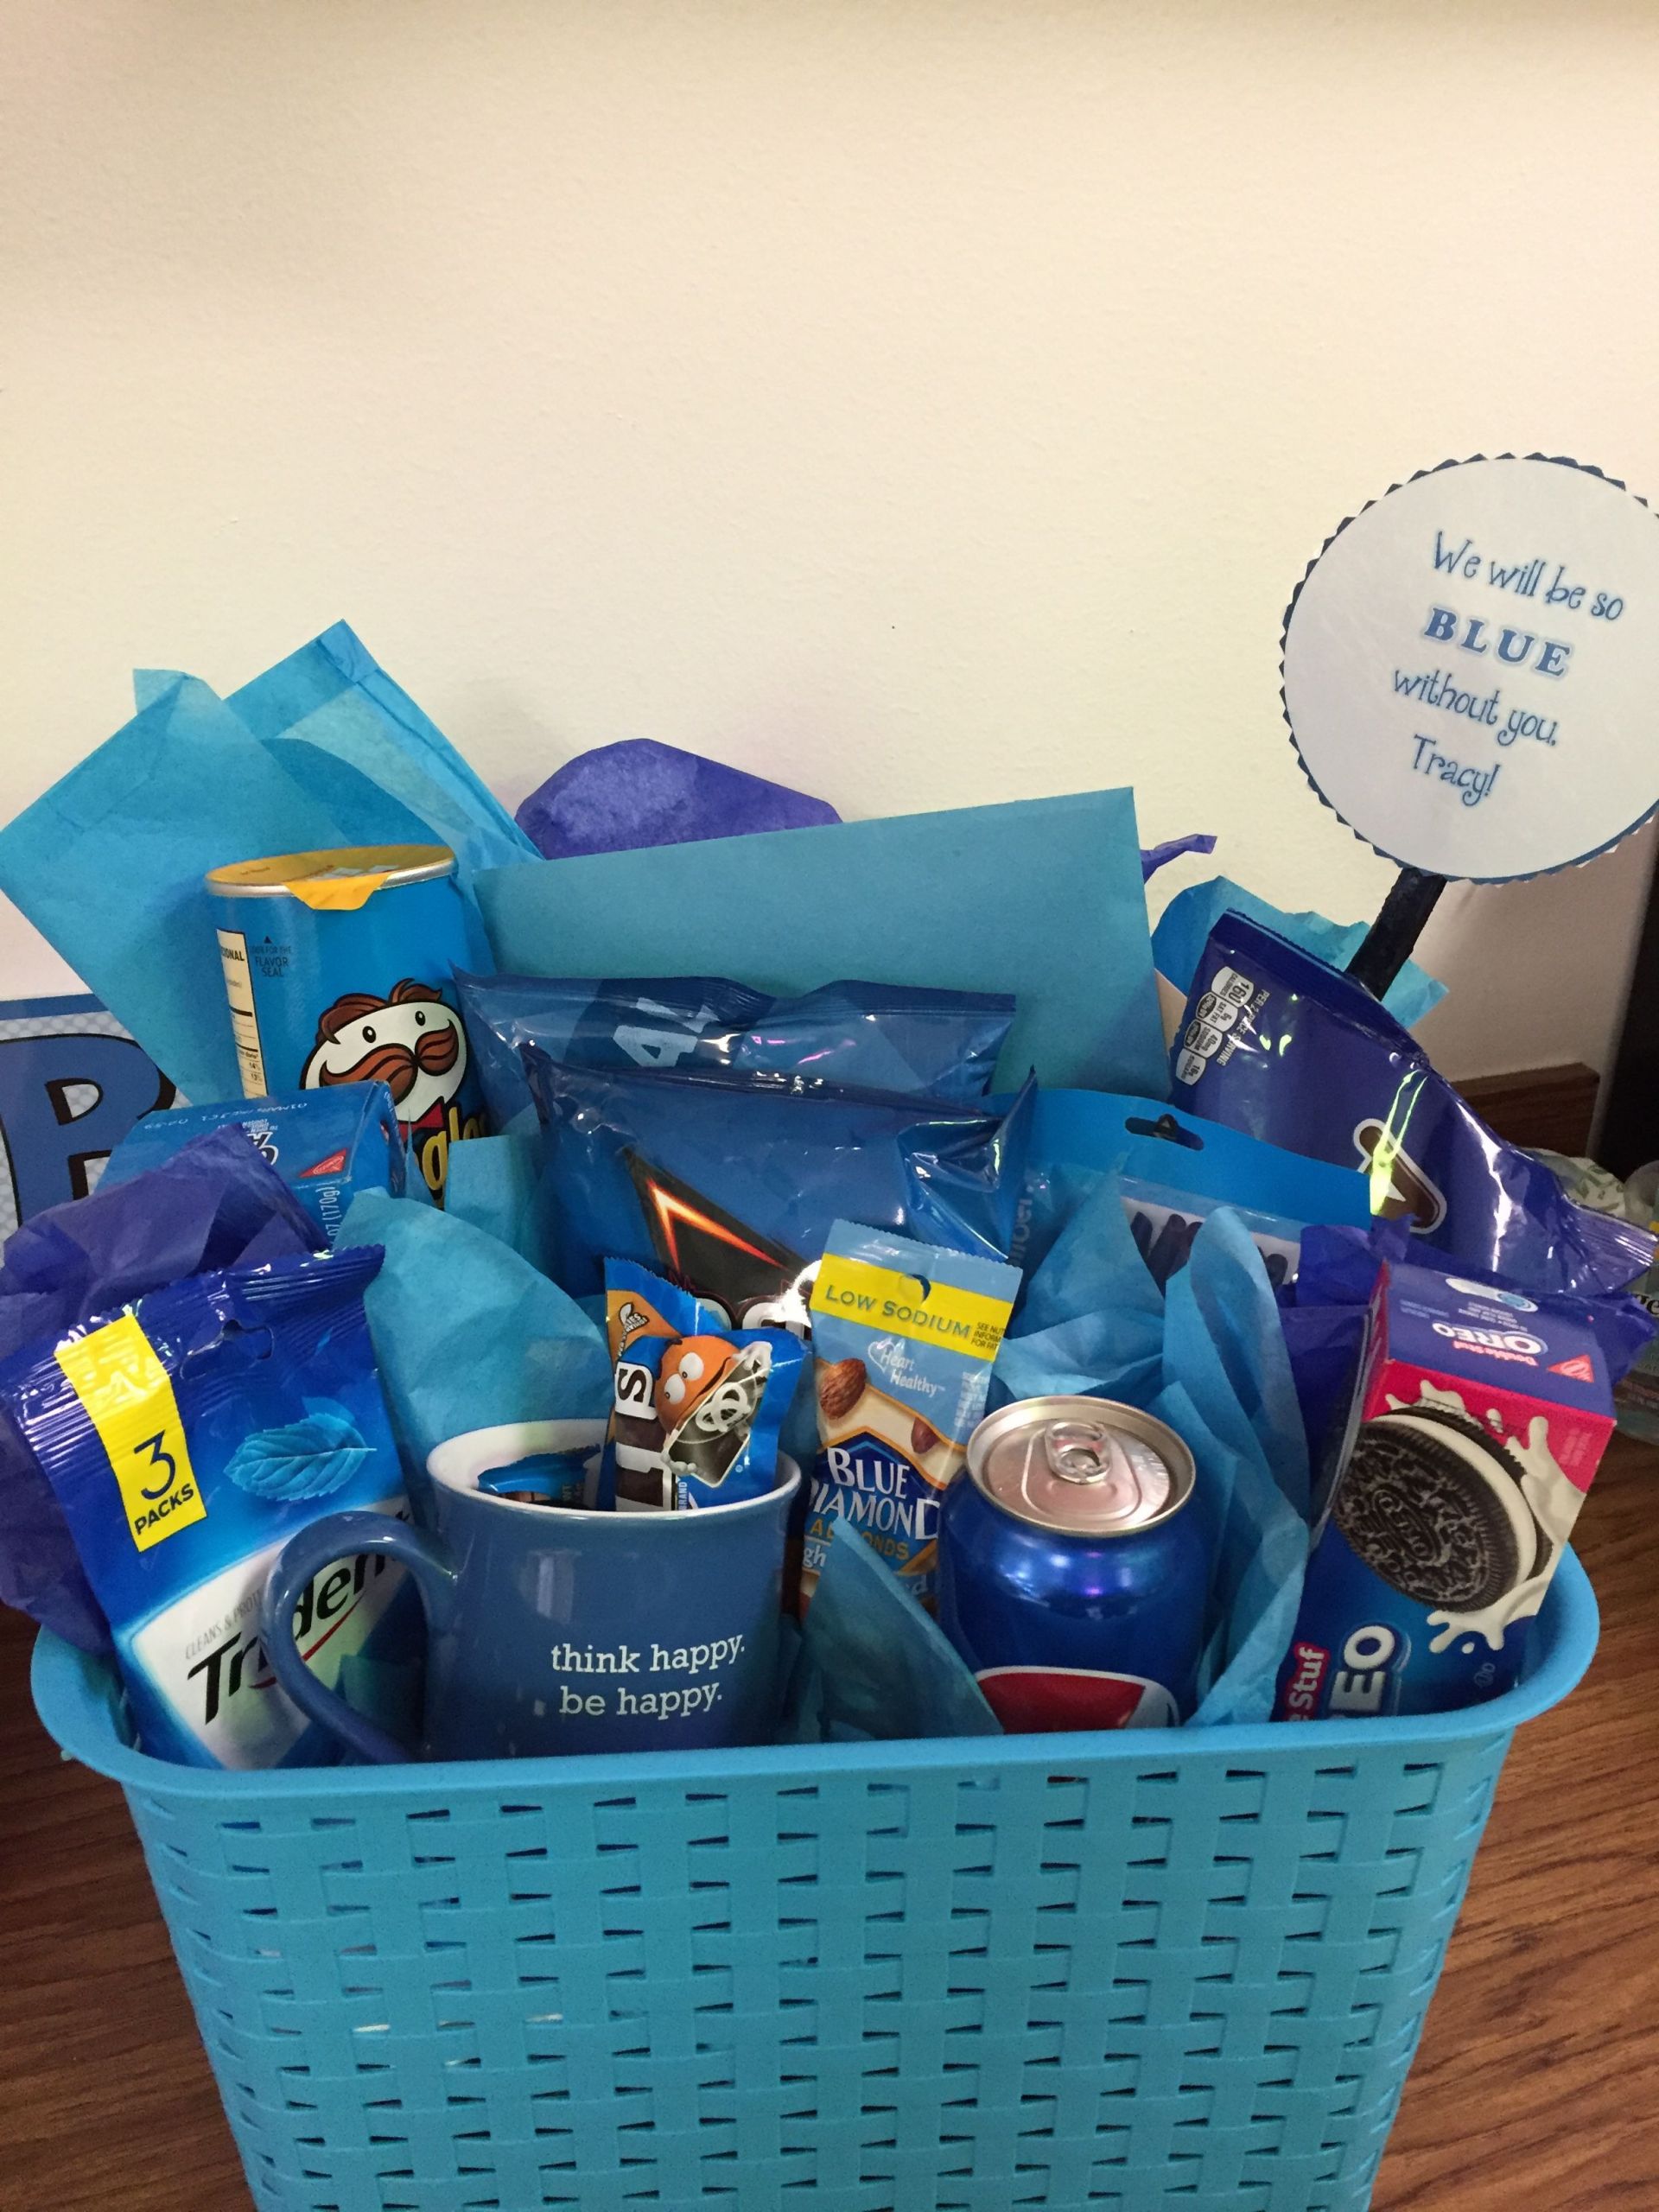 Gift Baskets For Coworkers Ideas
 Coworker leaving "blue without you" going away basket